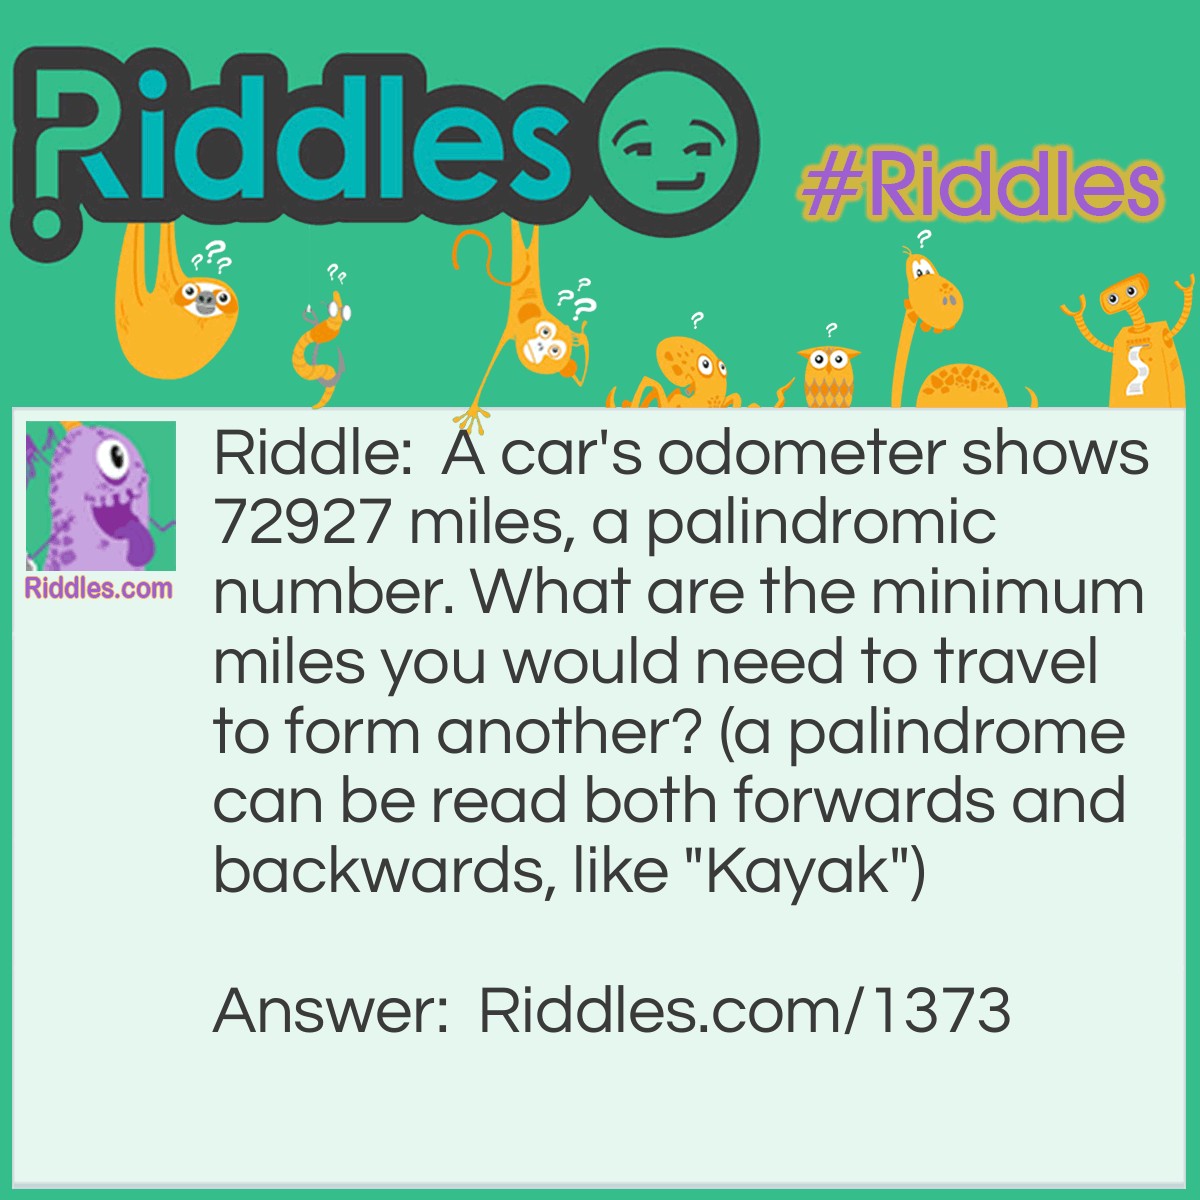 Riddle: A car's odometer shows 72927 miles, a palindromic number. What are the minimum miles you would need to travel to form another? (a palindrome can be read both forwards and backwards, like "Kayak") Answer: 110 miles. (73037)